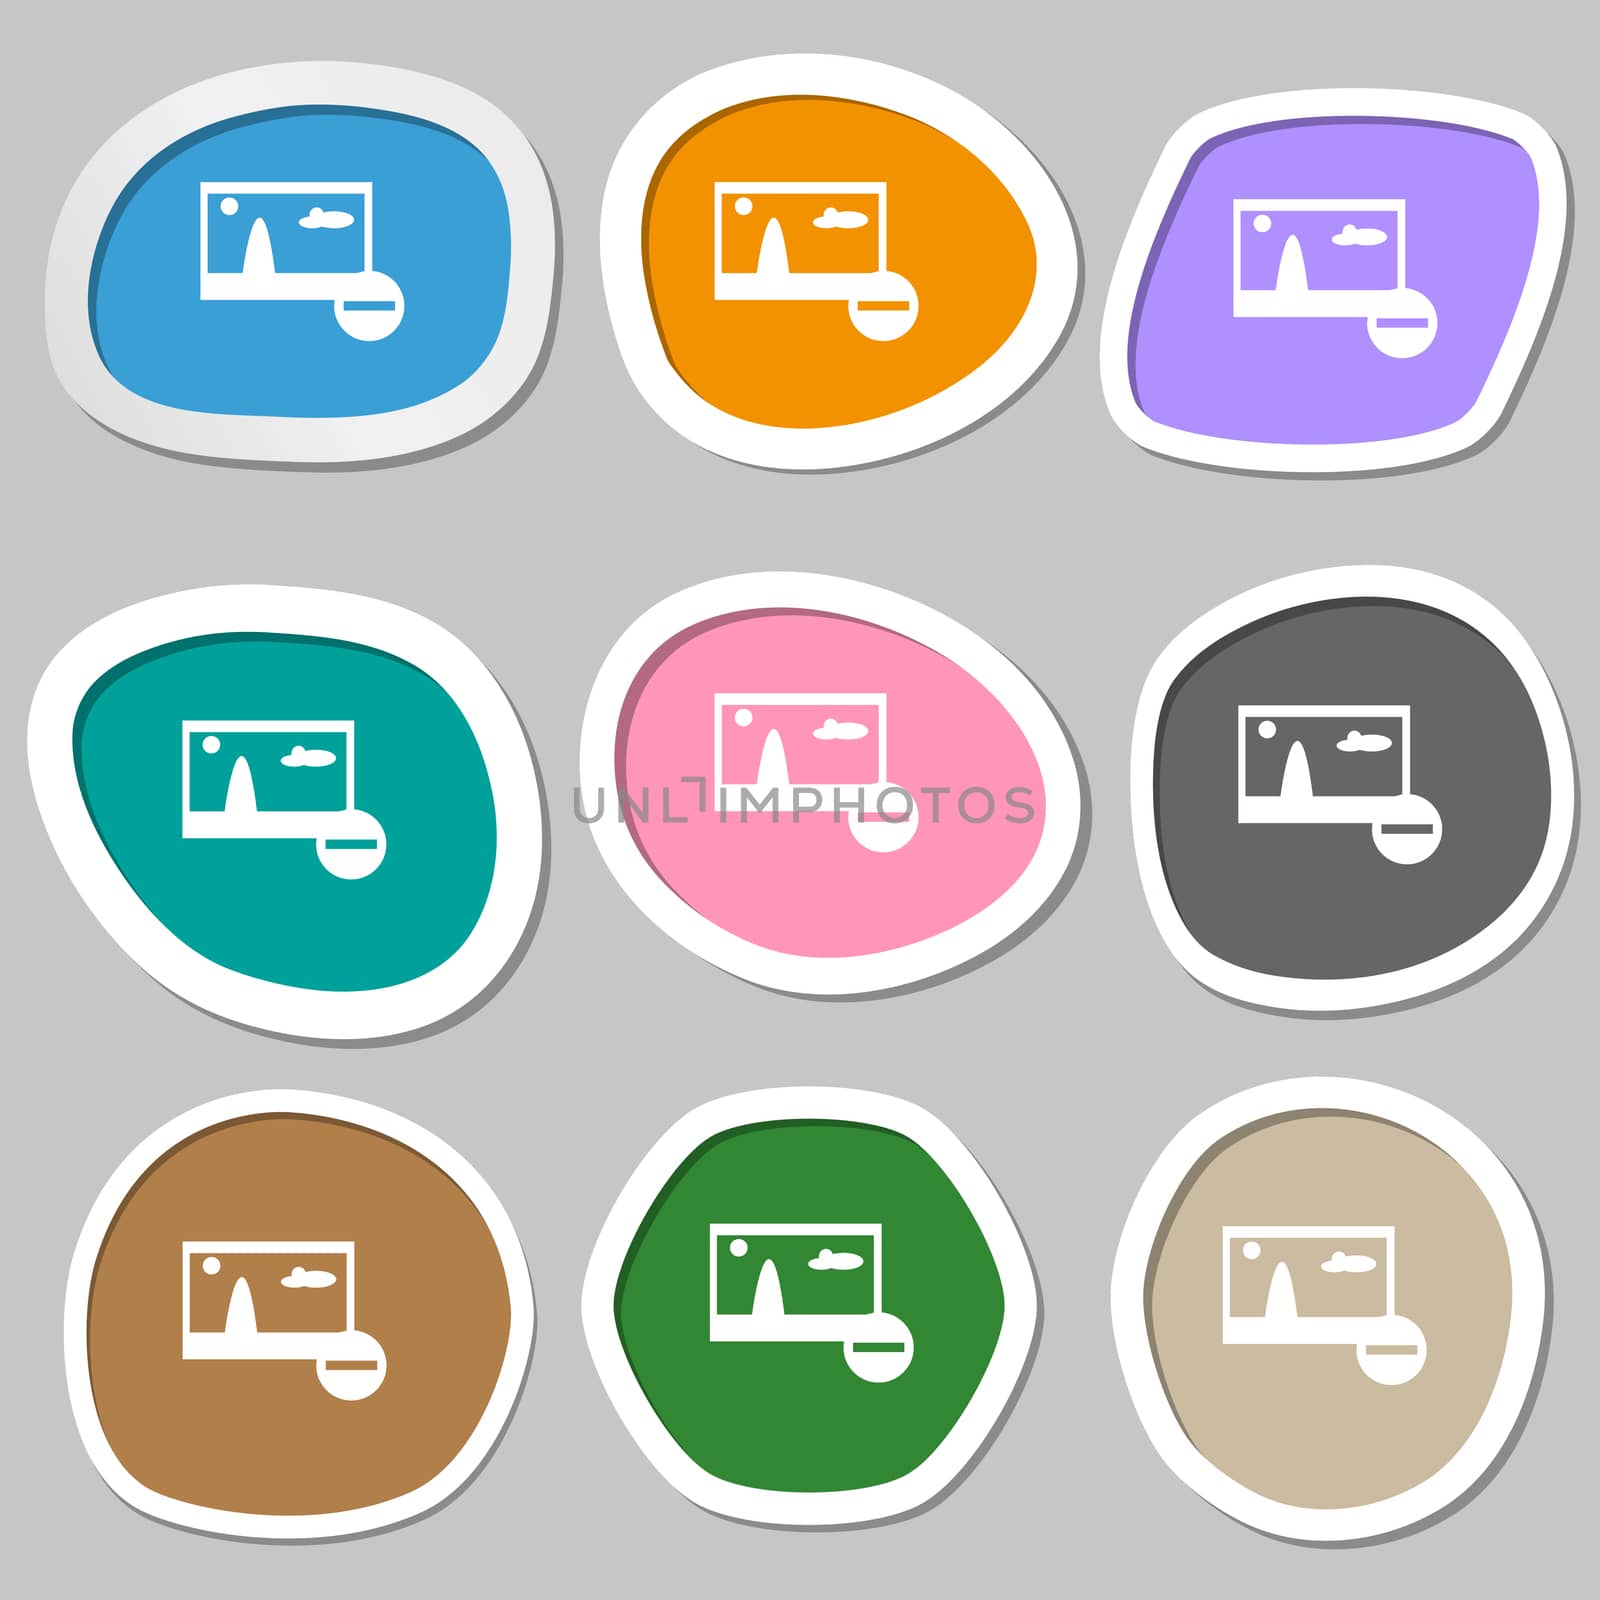 minus File JPG sign icon. Download image file symbol. Set colourful buttons. Multicolored paper stickers.  by serhii_lohvyniuk